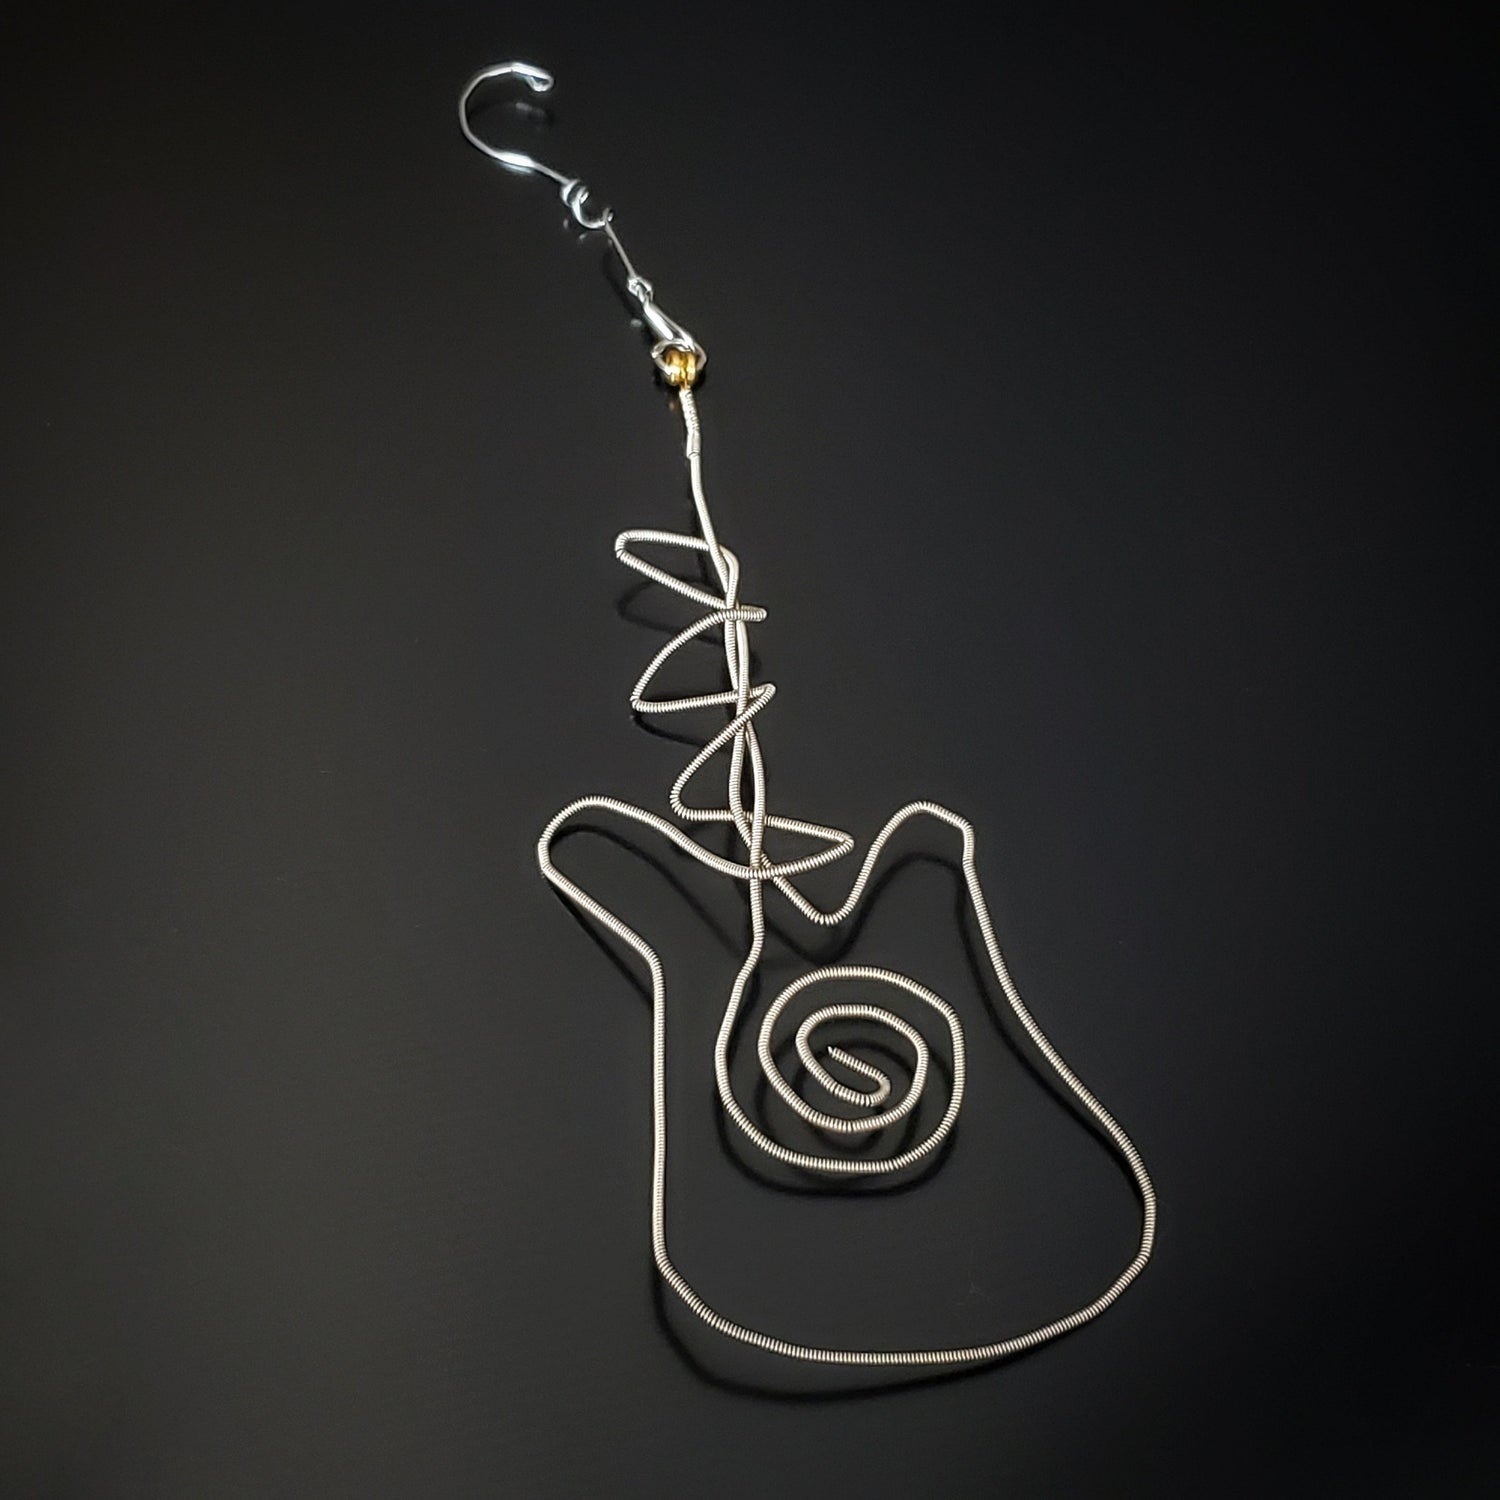 Christmas decoration in the shape of a guitar made from an upcycled guitar string next to a blue guitar pick 